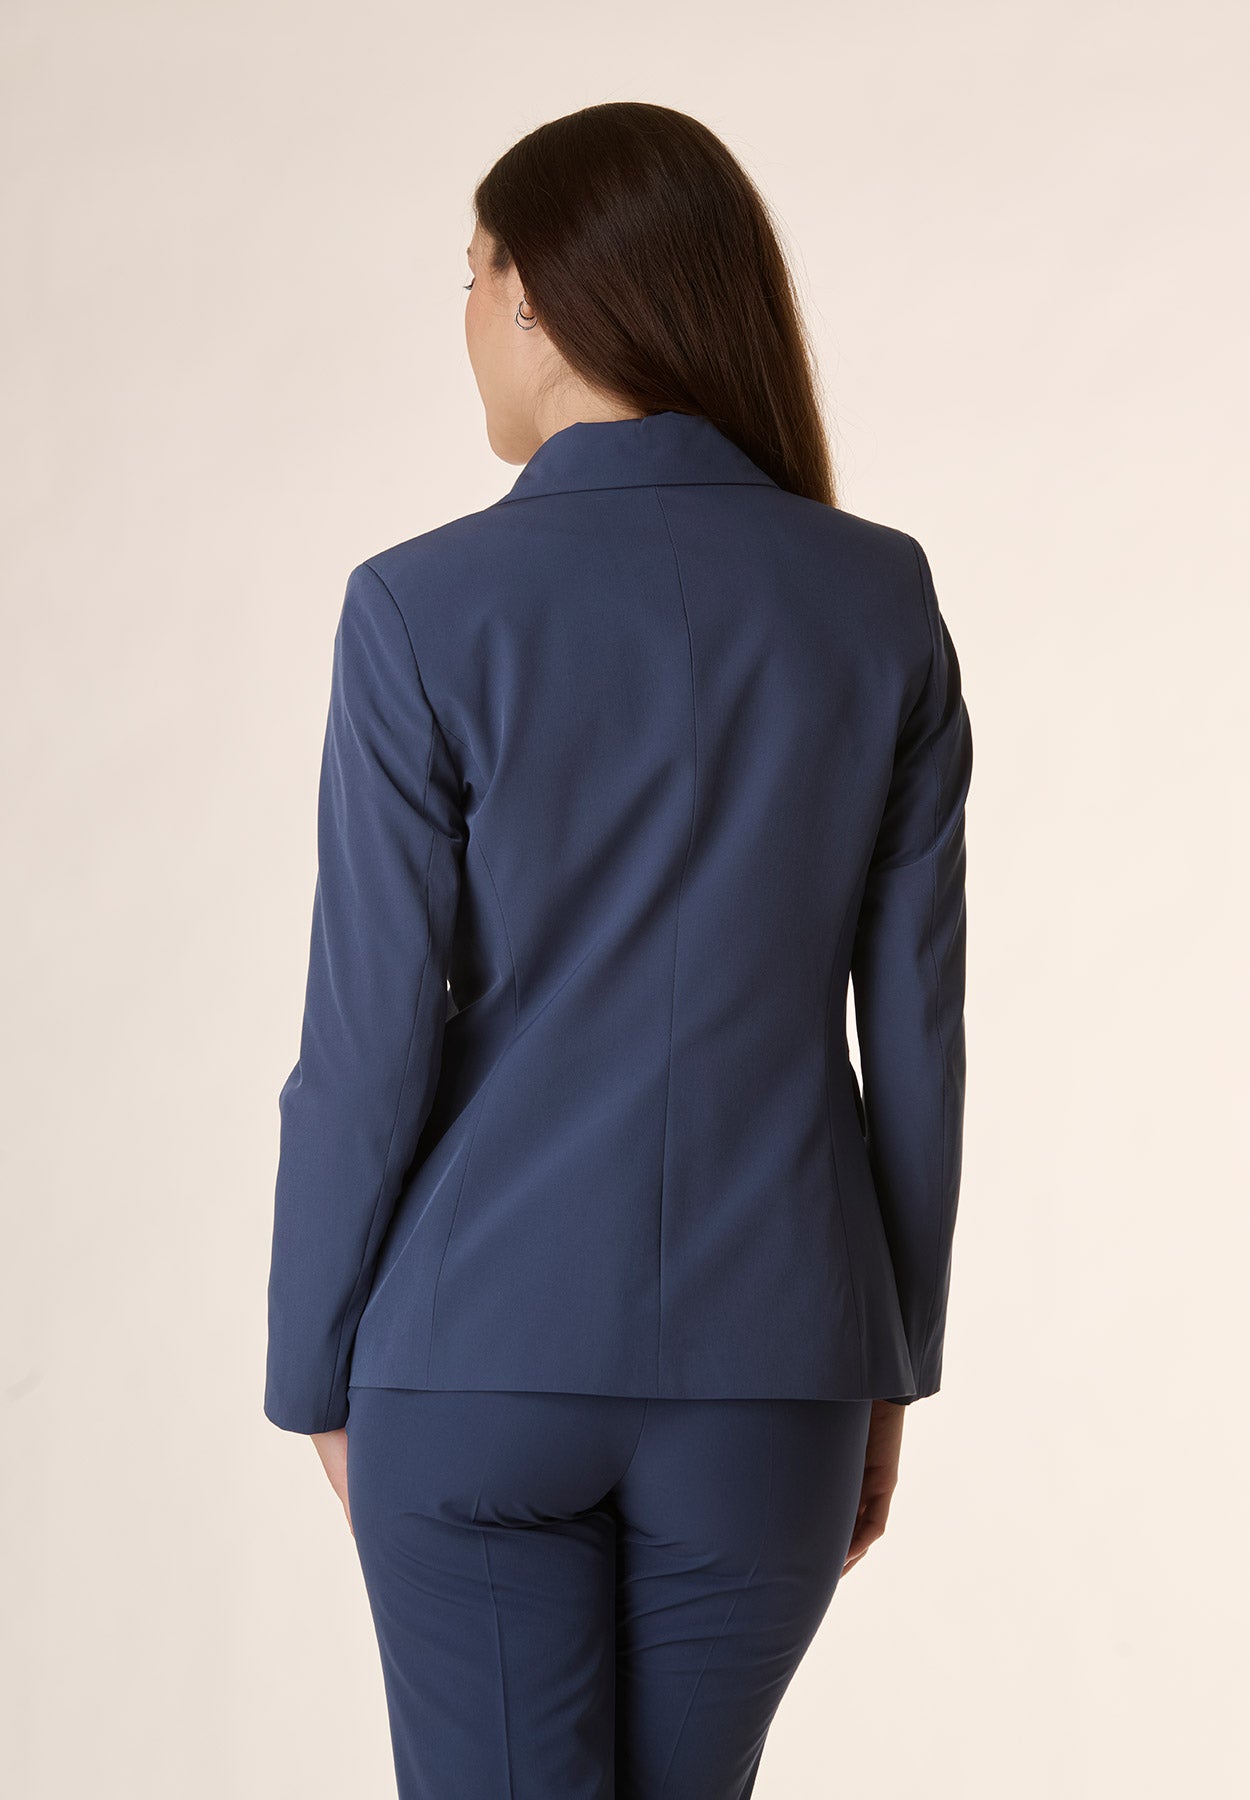 Blue single-breasted jacket with pockets